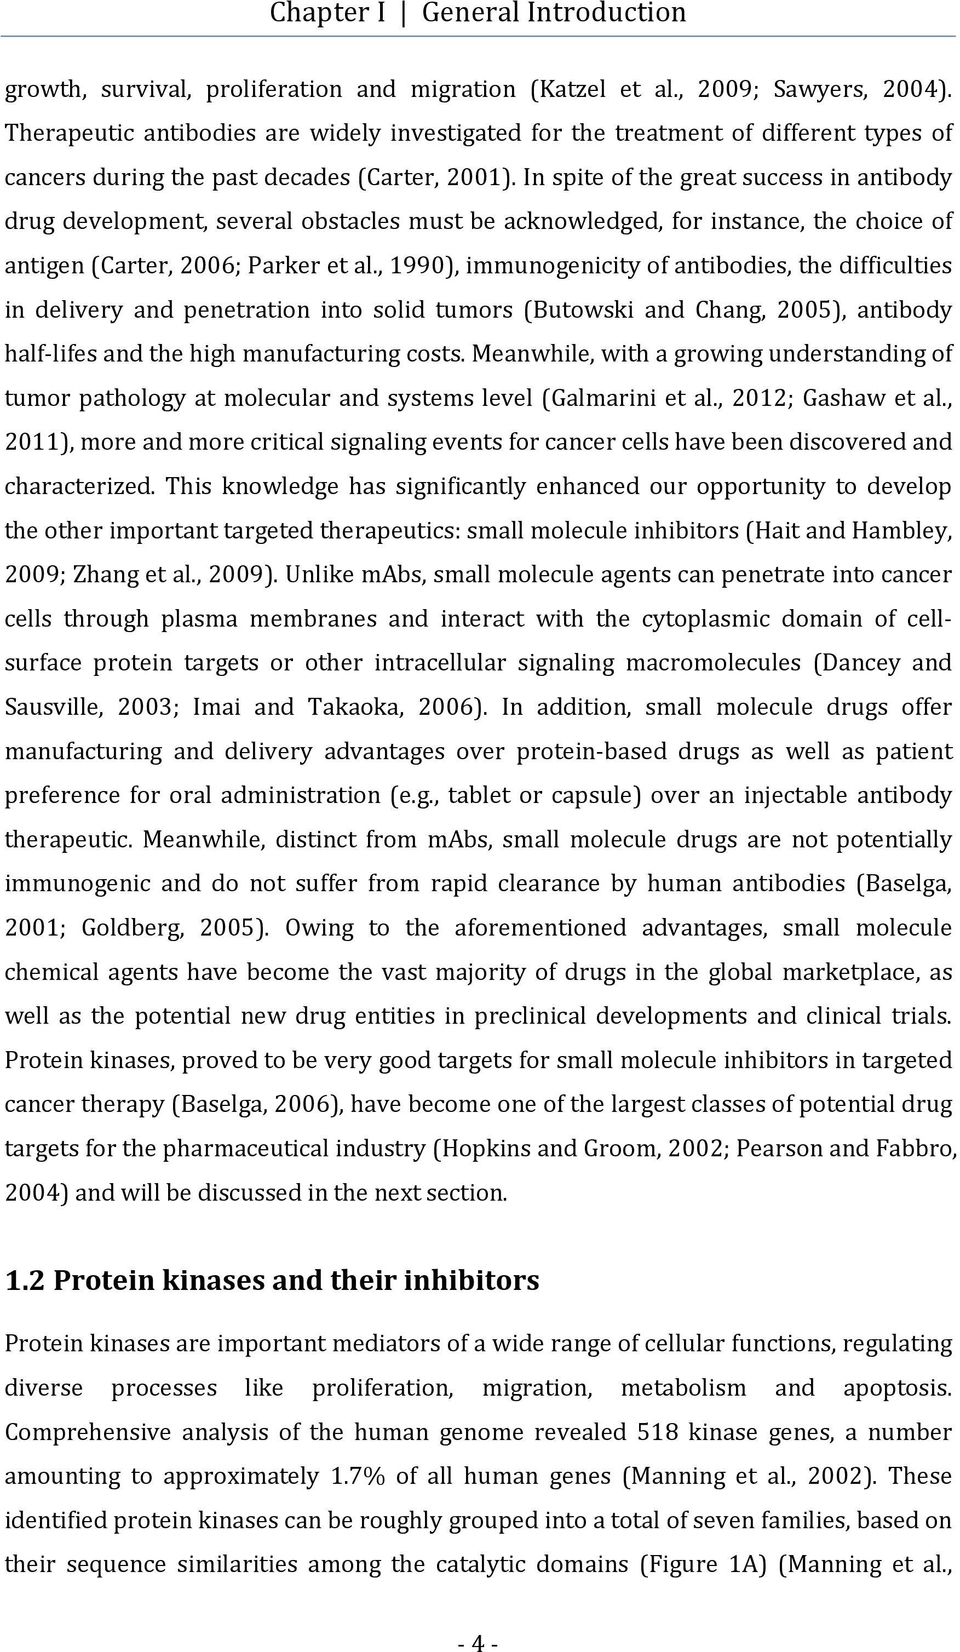 In spite of the great success in antibody drug development, several obstacles must be acknowledged, for instance, the choice of antigen (Carter, 2006; Parker et al.